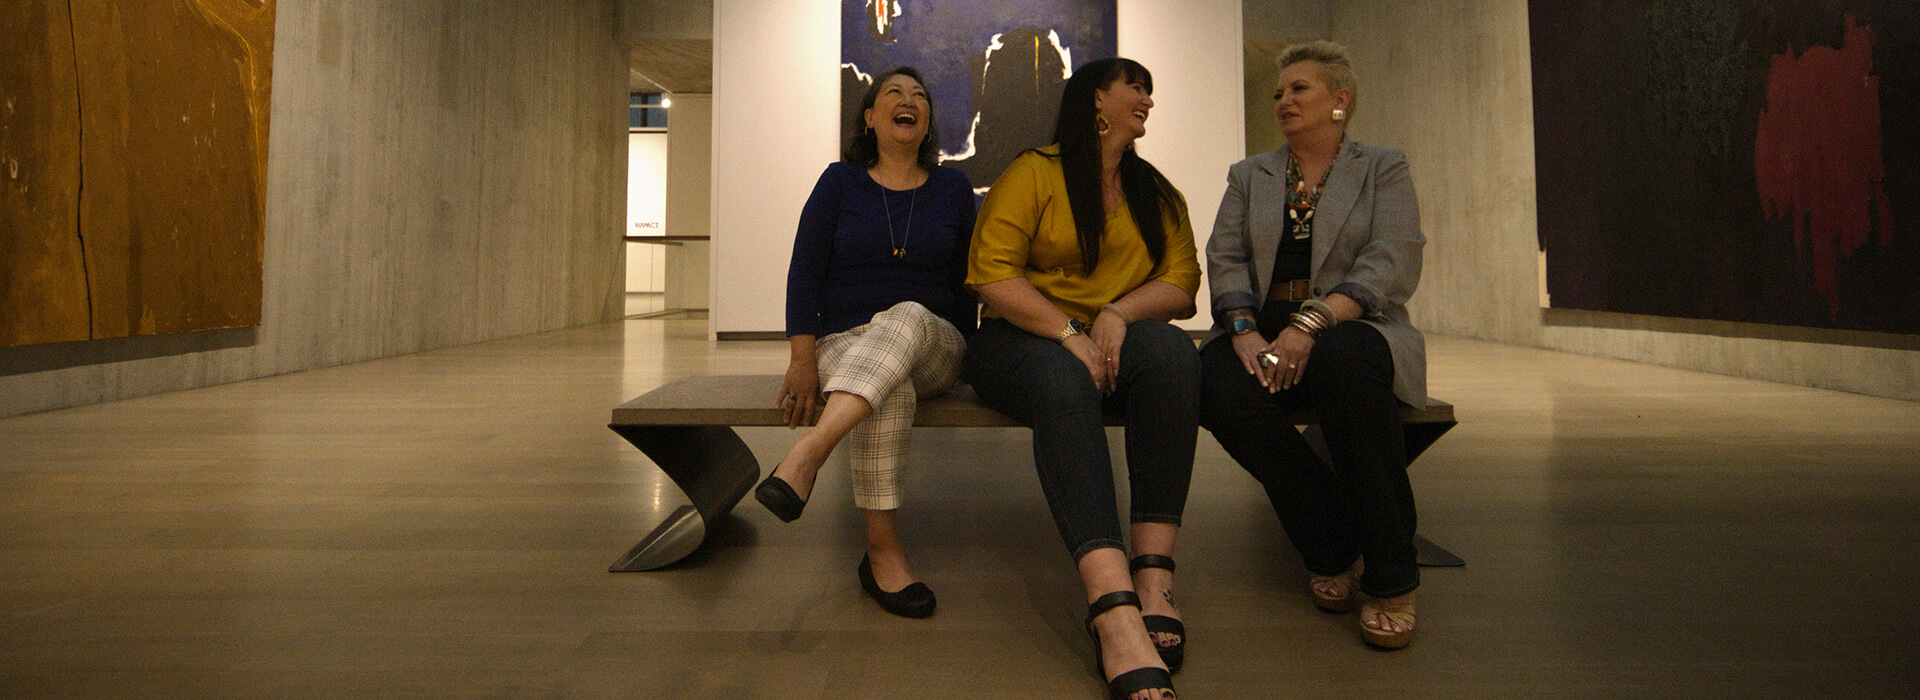 Three women sit in a dark gallery and laugh